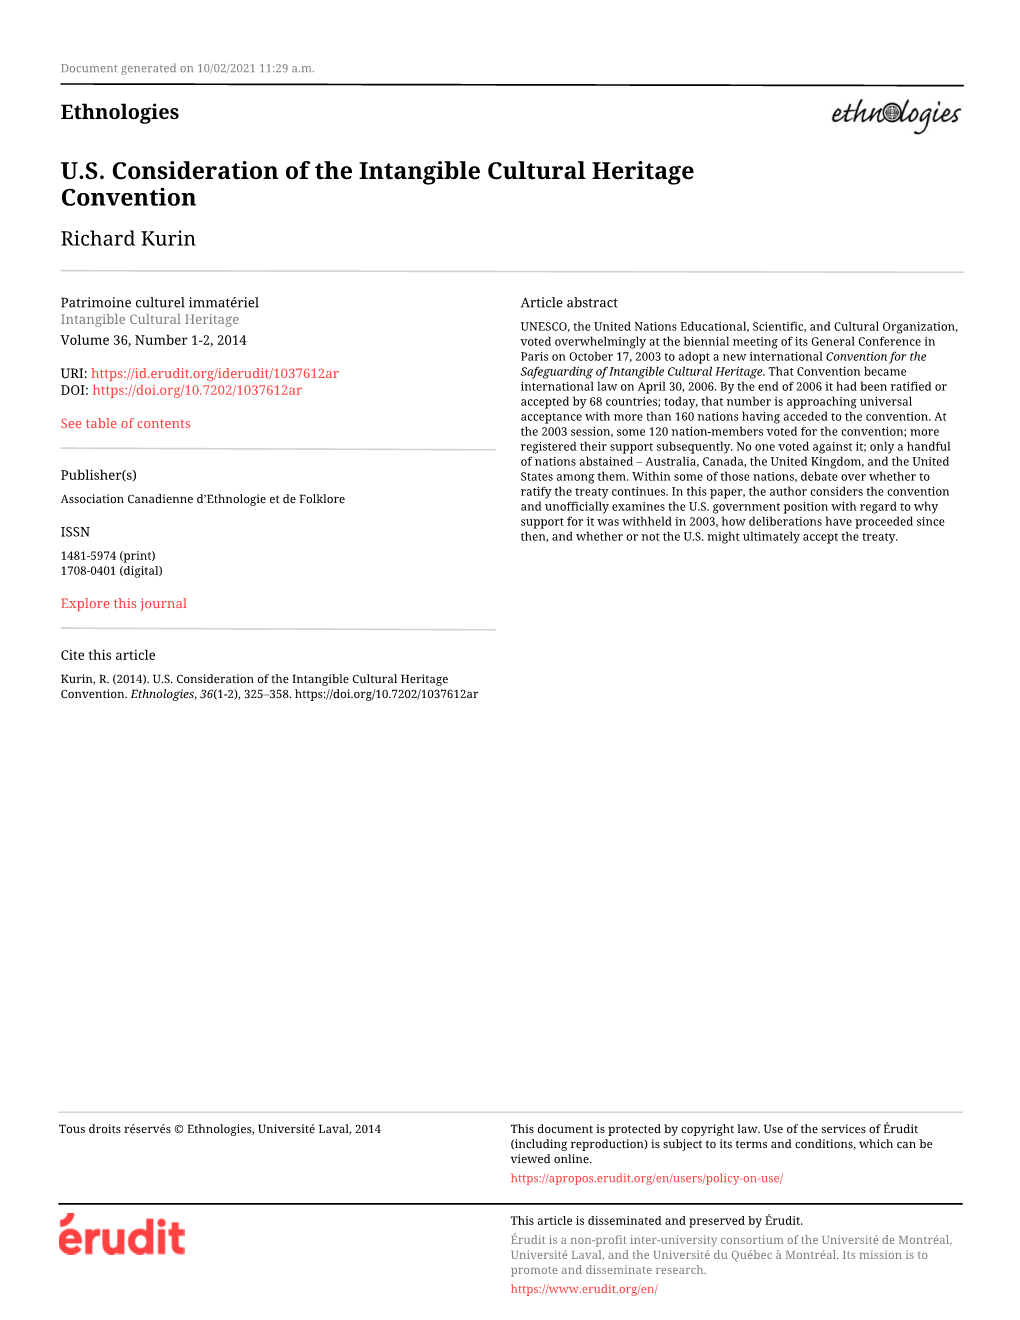 U.S. Consideration of the Intangible Cultural Heritage Convention Richard Kurin